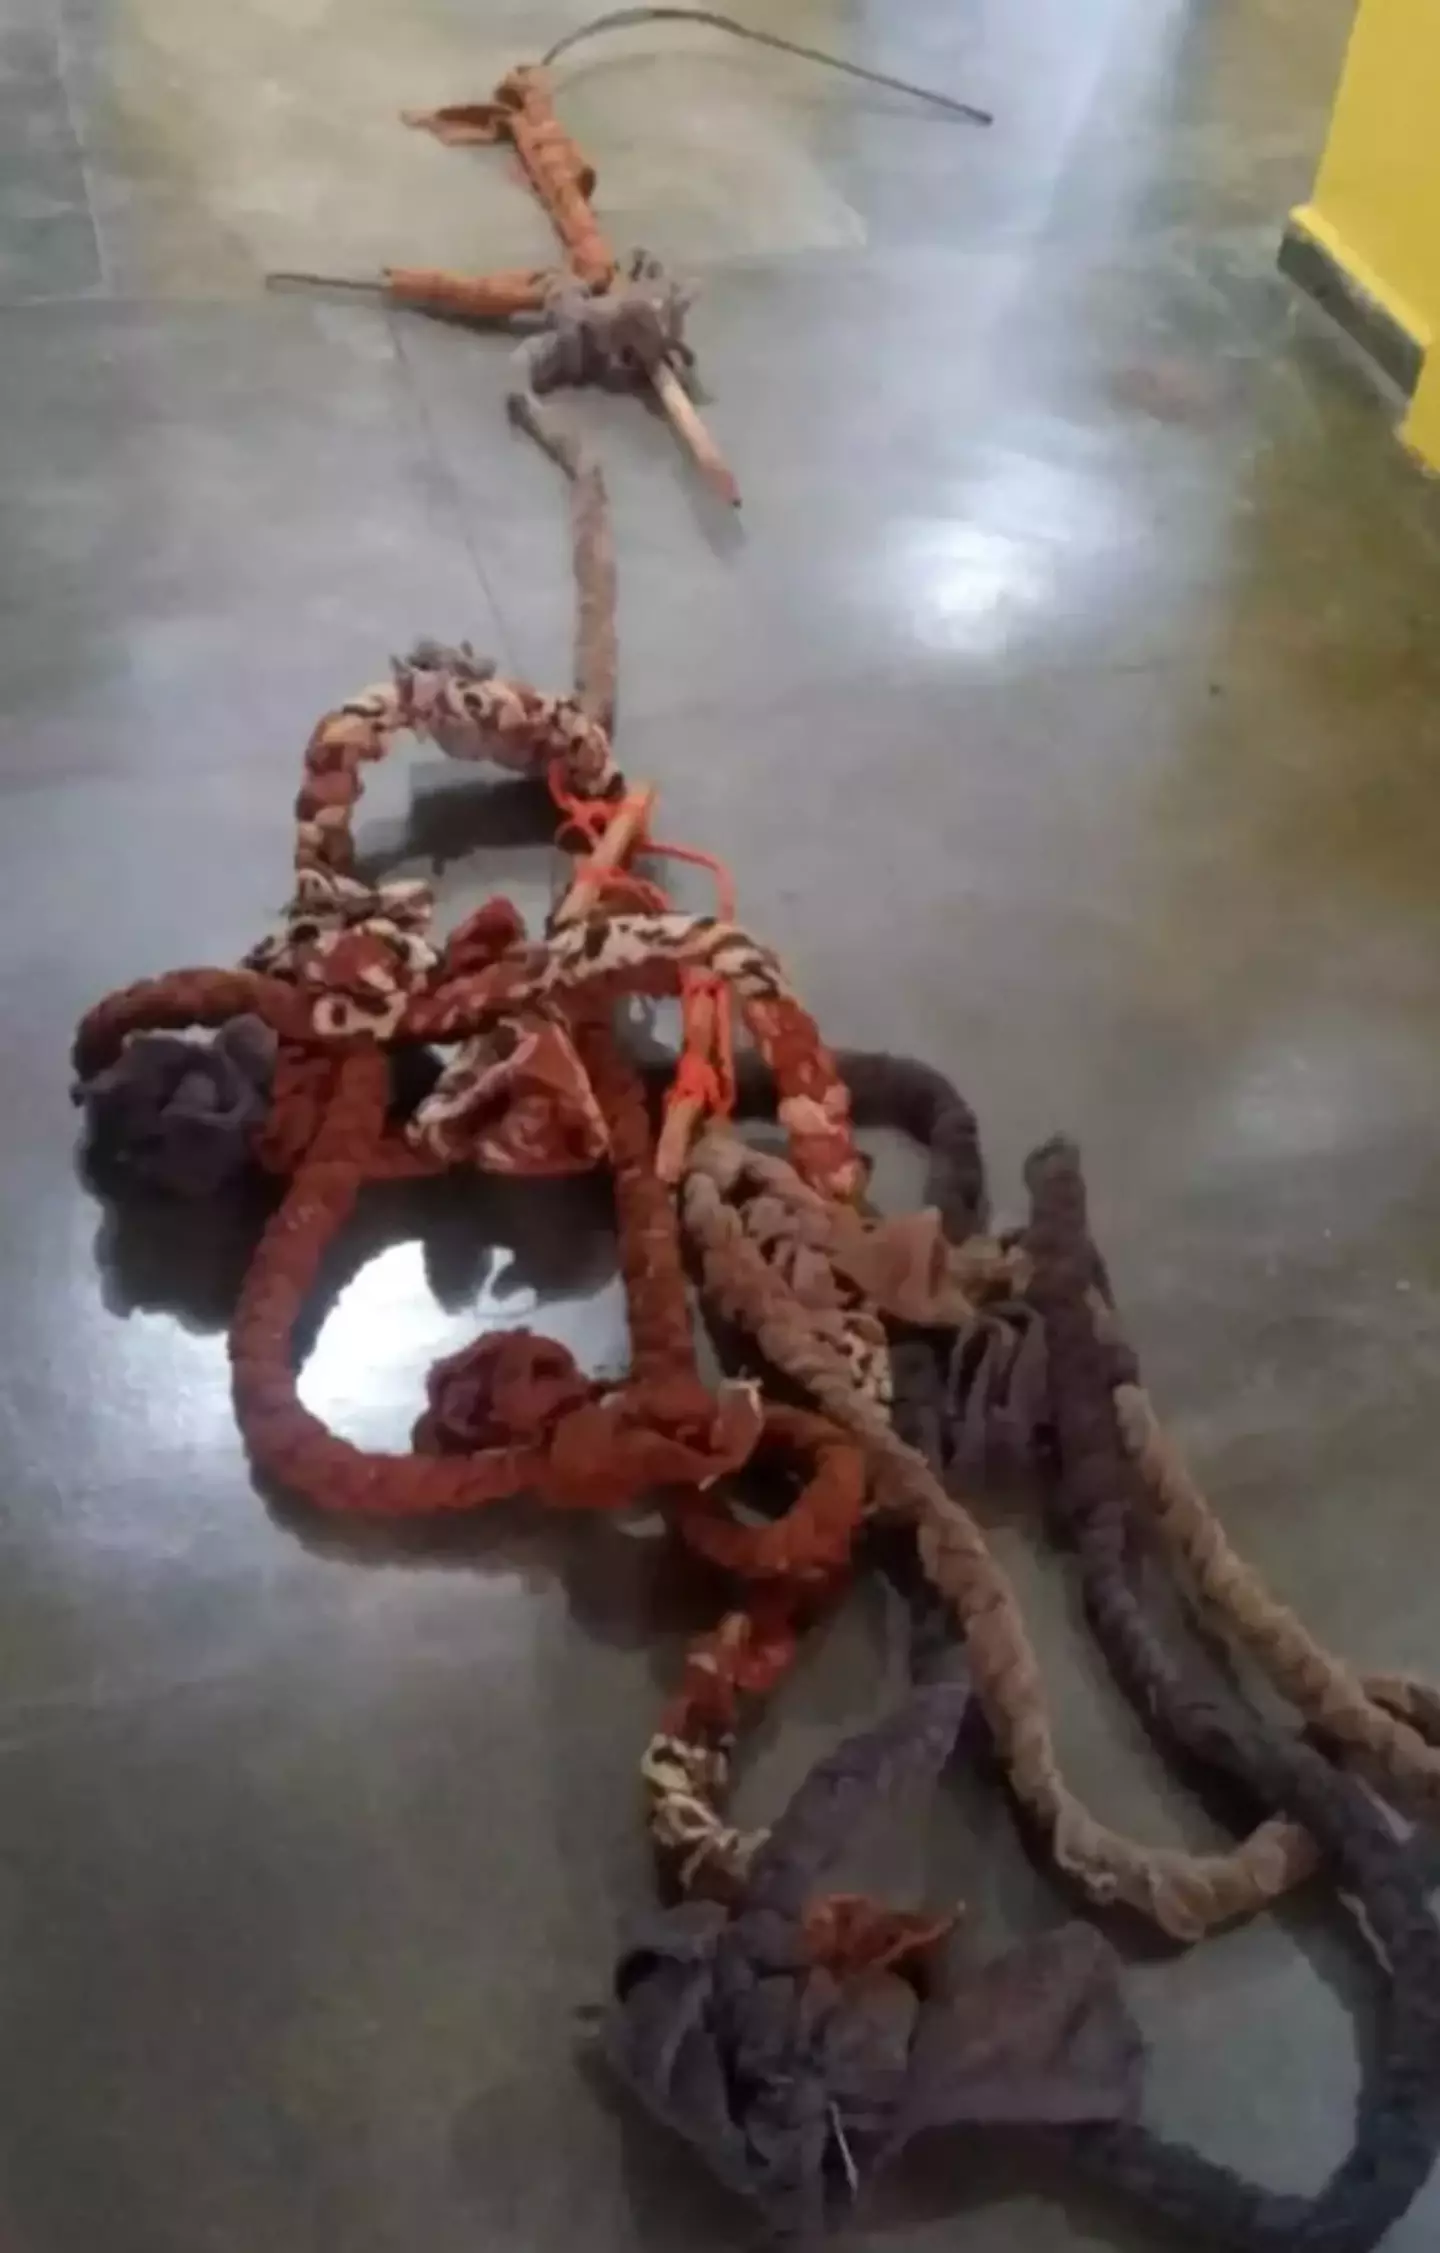 He used this rope to break free from the prison.